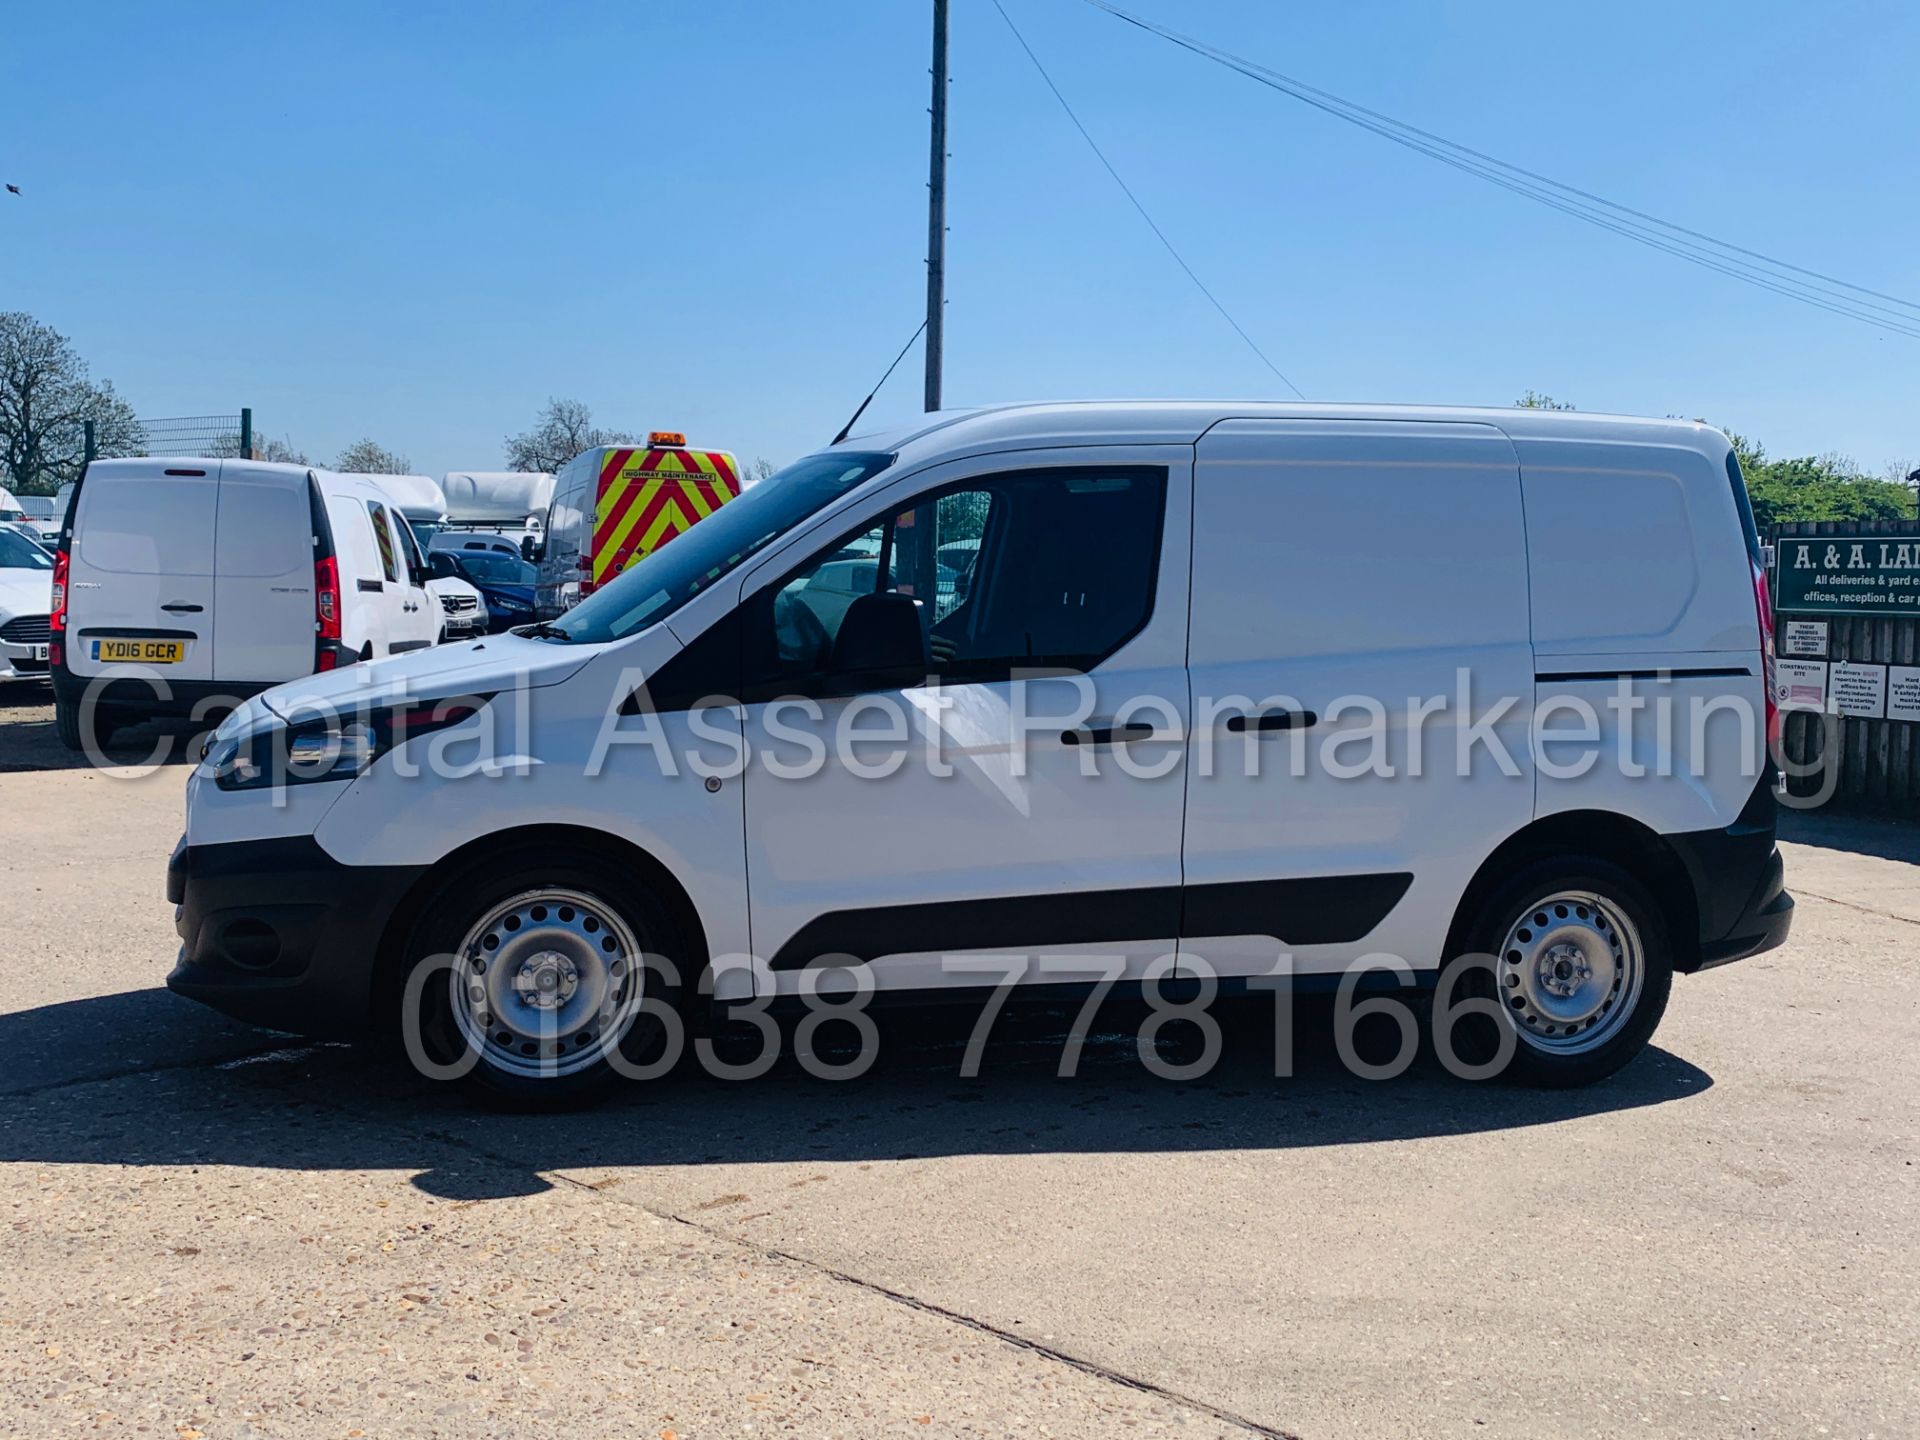 (On Sale) FORD TRANSIT CONNECT *SWB* (2017 - EURO 6) '1.5 TDCI - 6 SPEED' (1 OWNER - FULL HISTORY) - Image 4 of 38